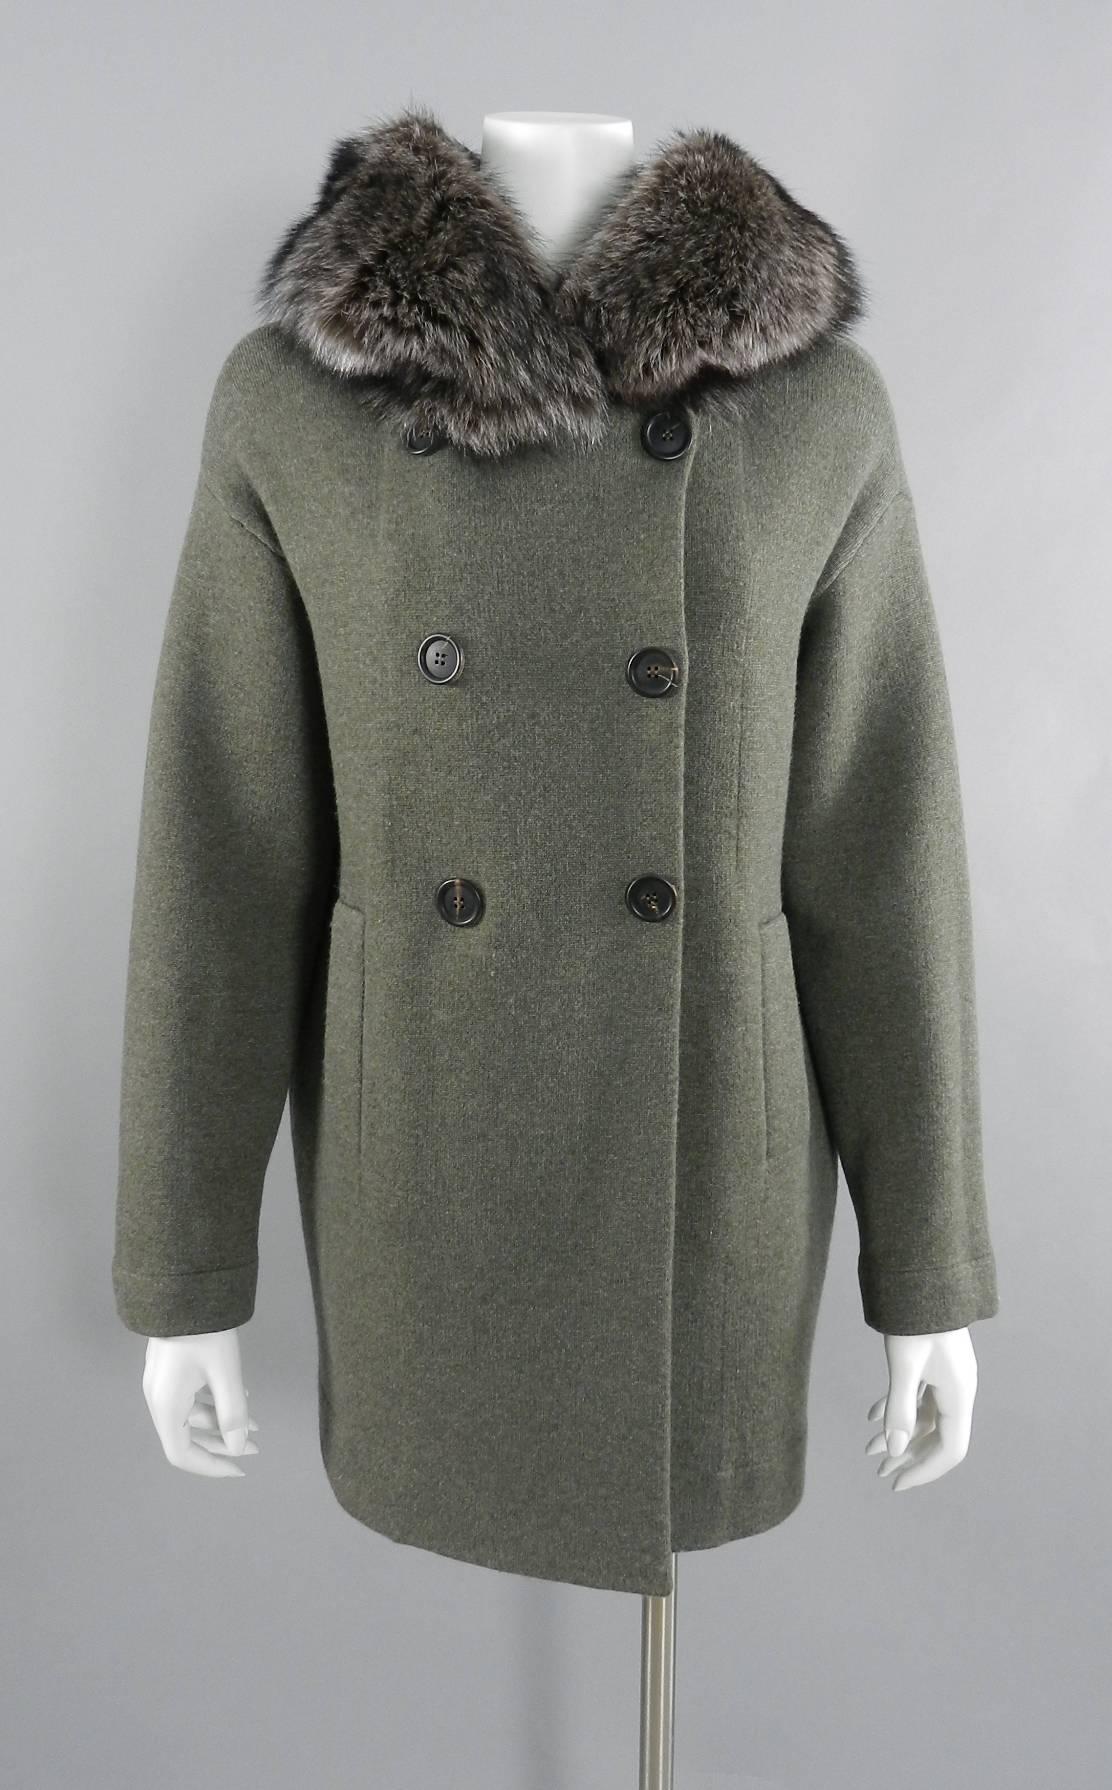 Brunello Cucinelli Cashmere Knit Sweater Coat with Fox Fur Hood.  100% cashmere double-faced knit jersey in grey / olive with dark charcoal grey interior. Fastens at front with large hidden snaps, has side hip pockets, dropped shoulder seams, and